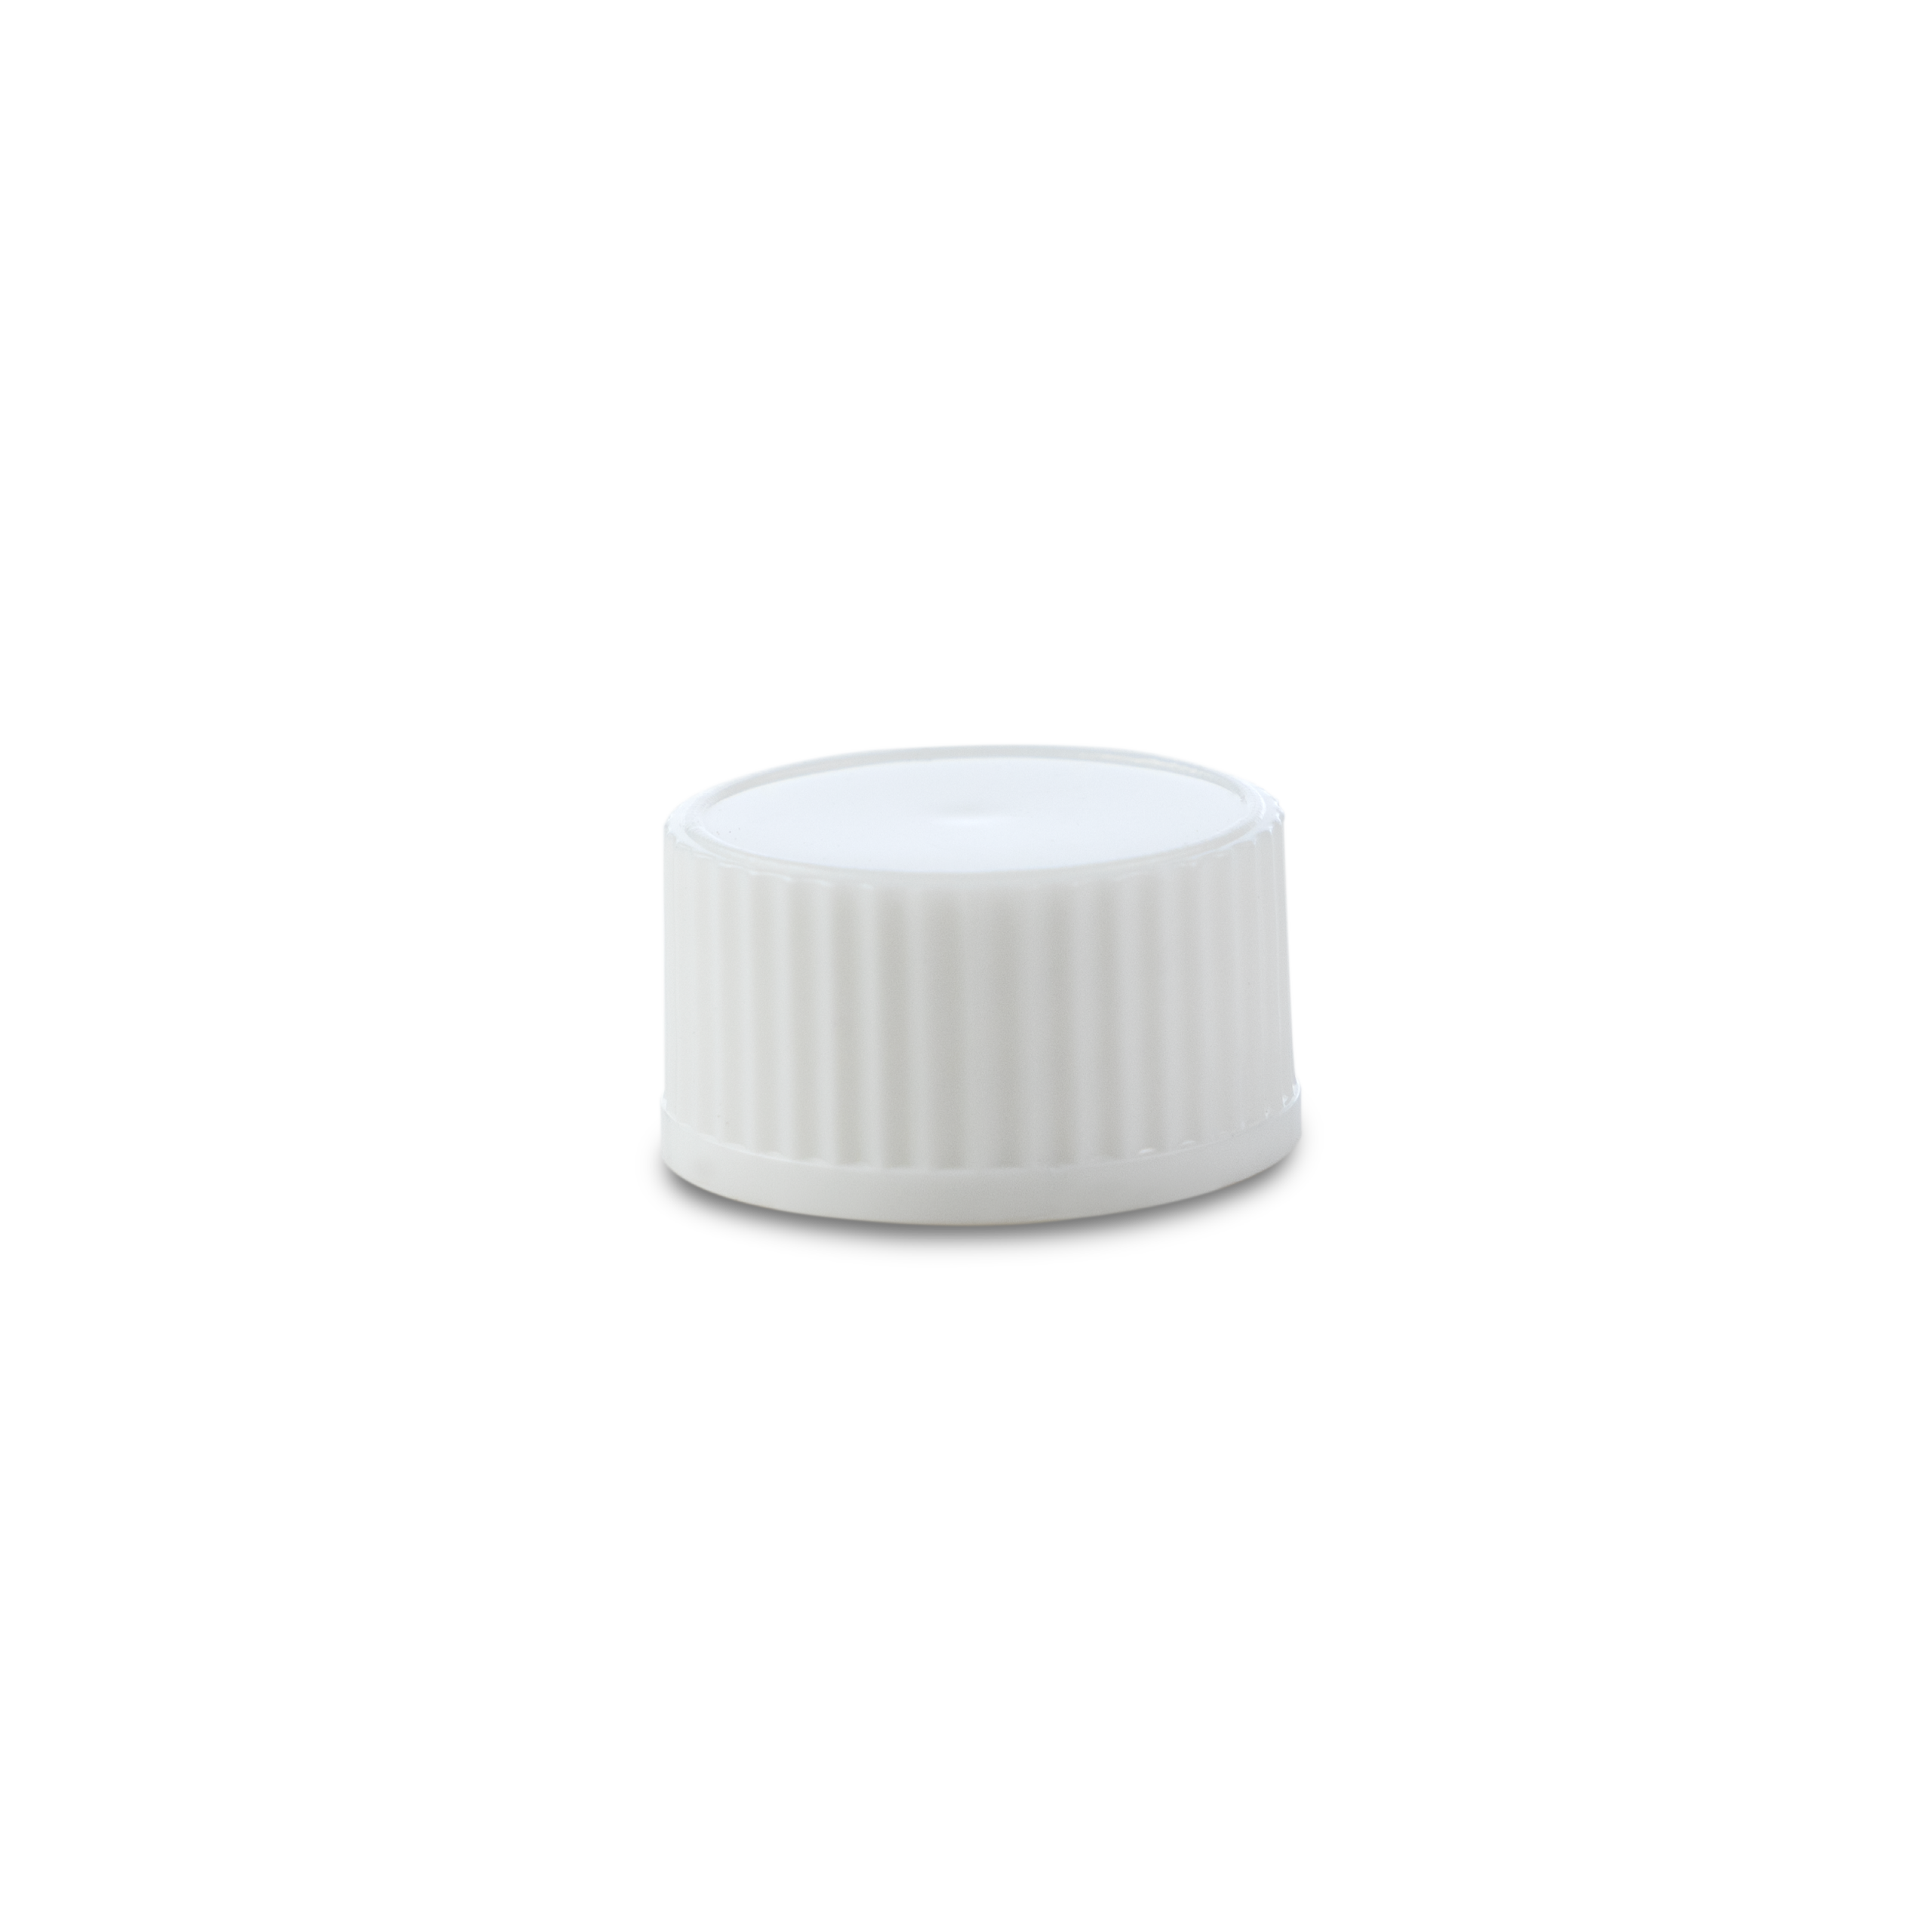 18-400 White PP Cap with Polycone Liner